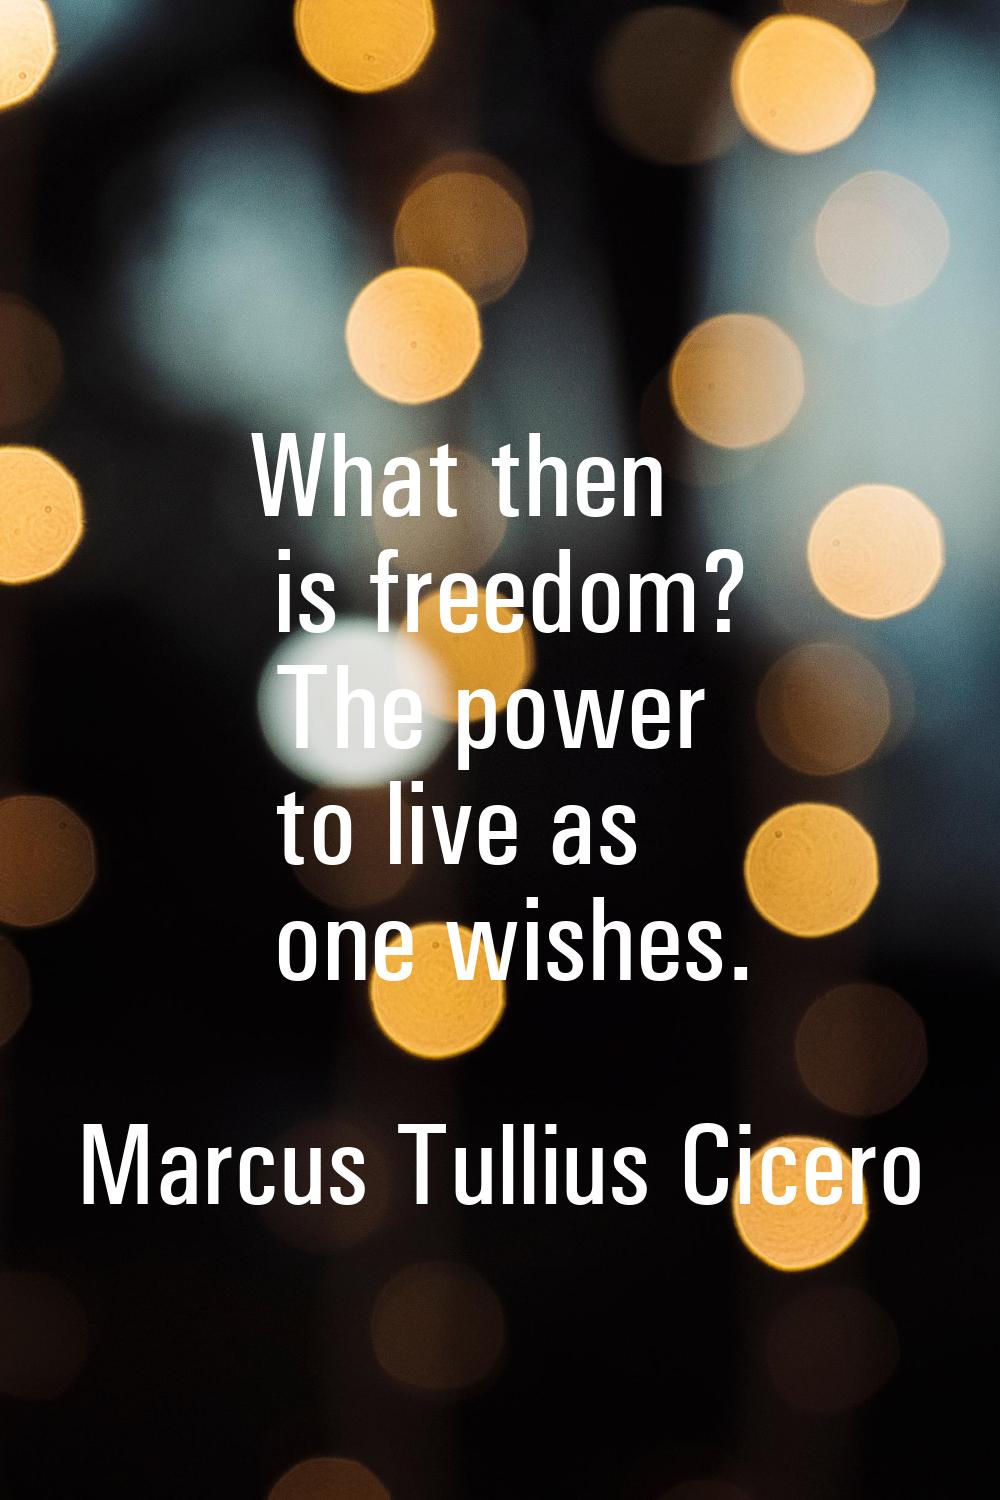 What then is freedom? The power to live as one wishes.